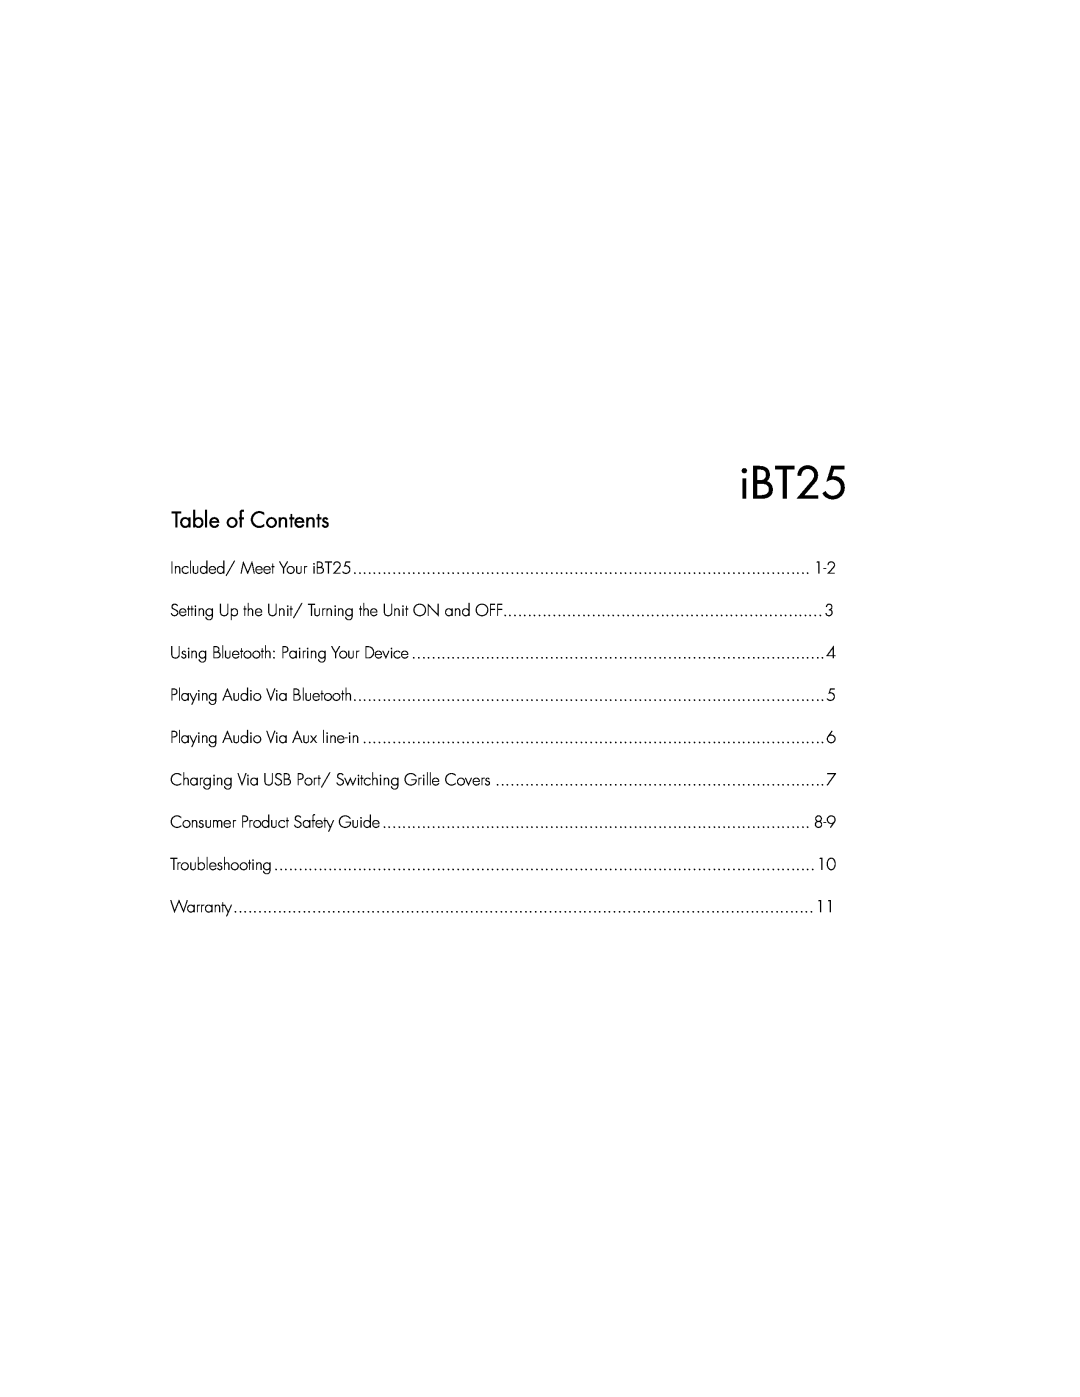 iHome IBT25BC instruction manual Table of Contents, iBT25 